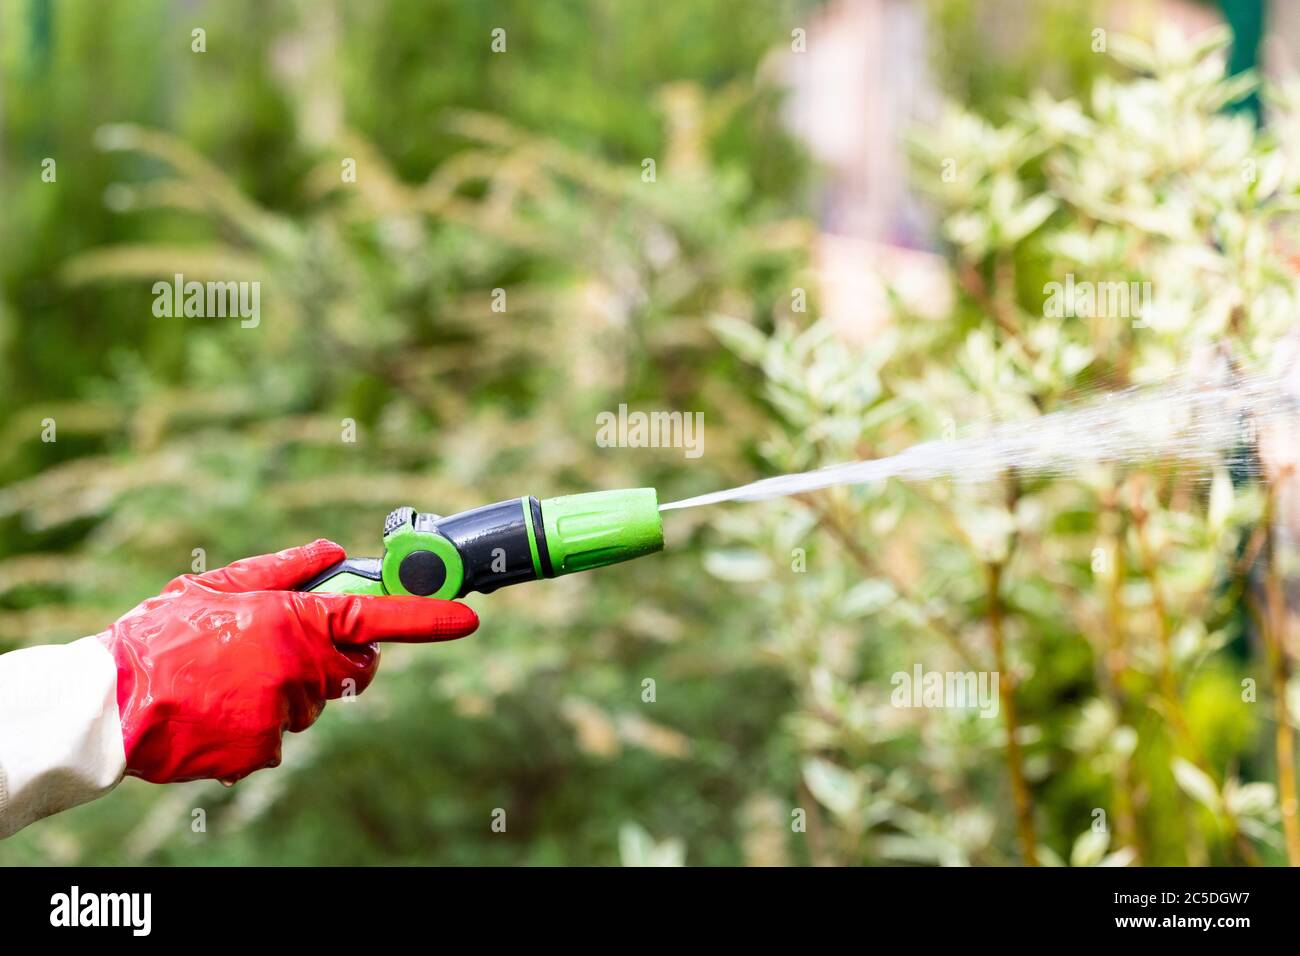 Hand in red rubber gloves with garden hose watering plants, close up, blurred background. Gardening concept Stock Photo